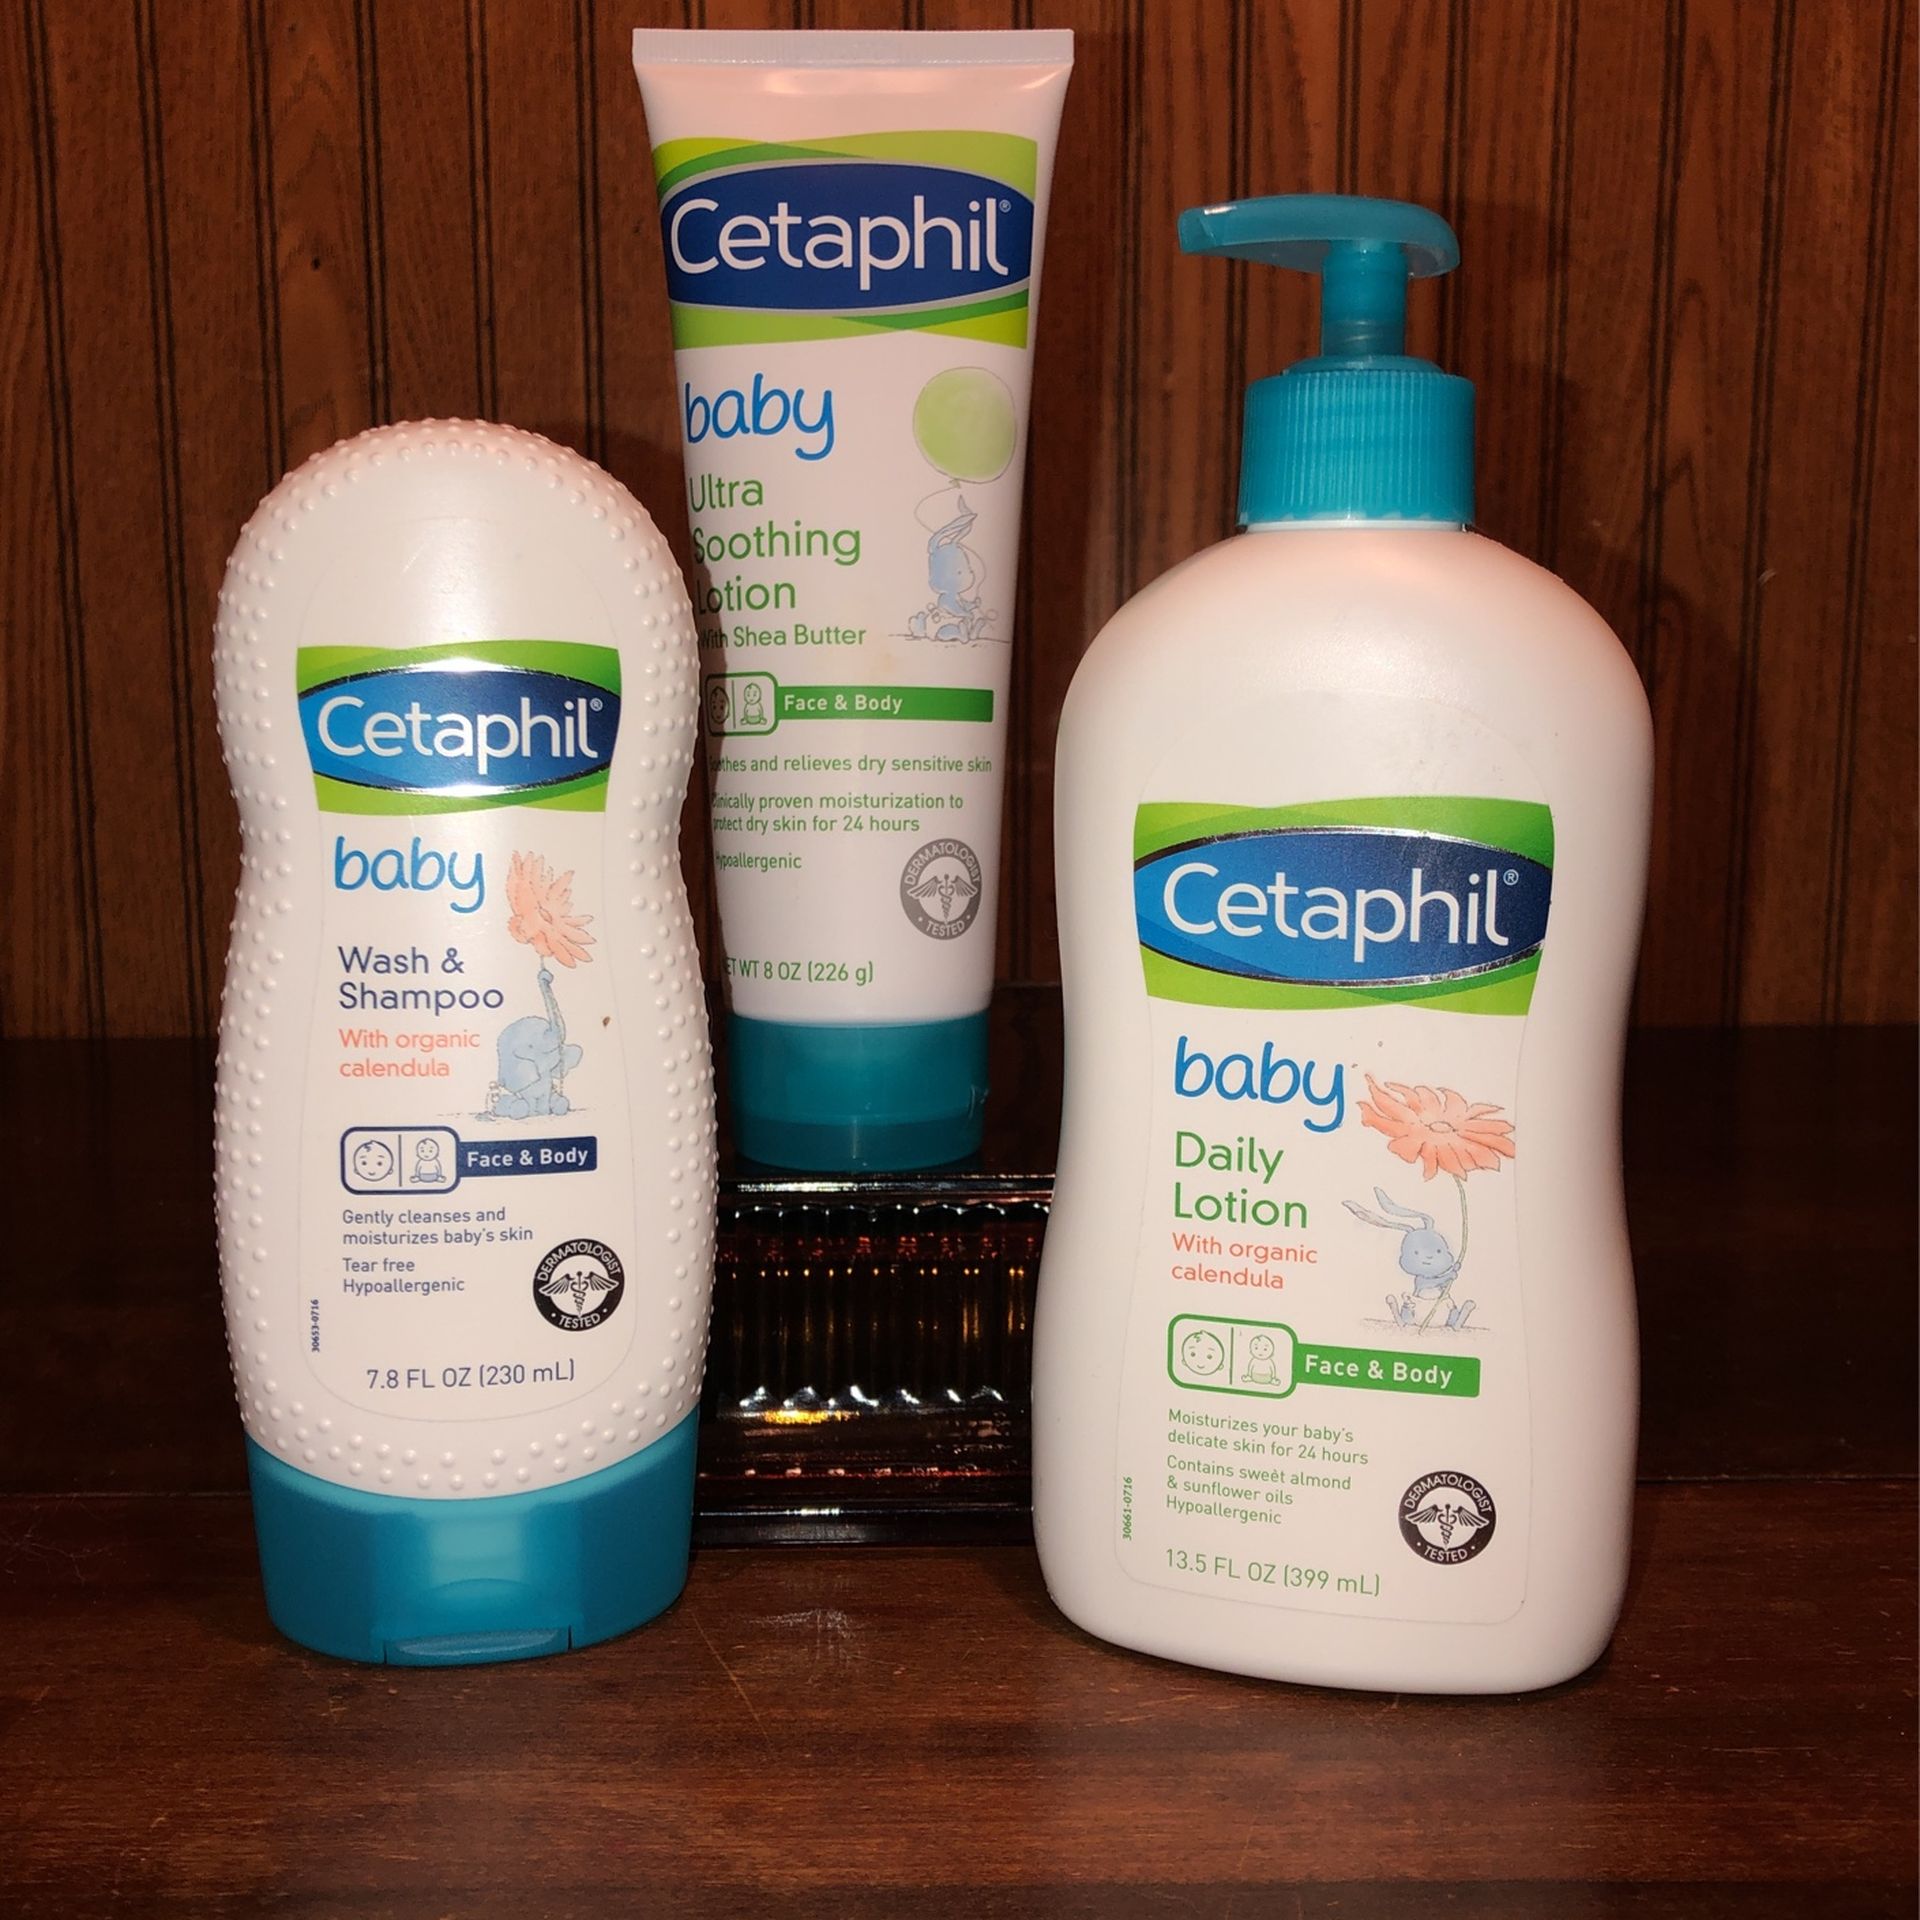 All Brand NEW!!! ❇️ Cetaphil baby brand (((PENDING PICK UP TODAY 4-5pm)))